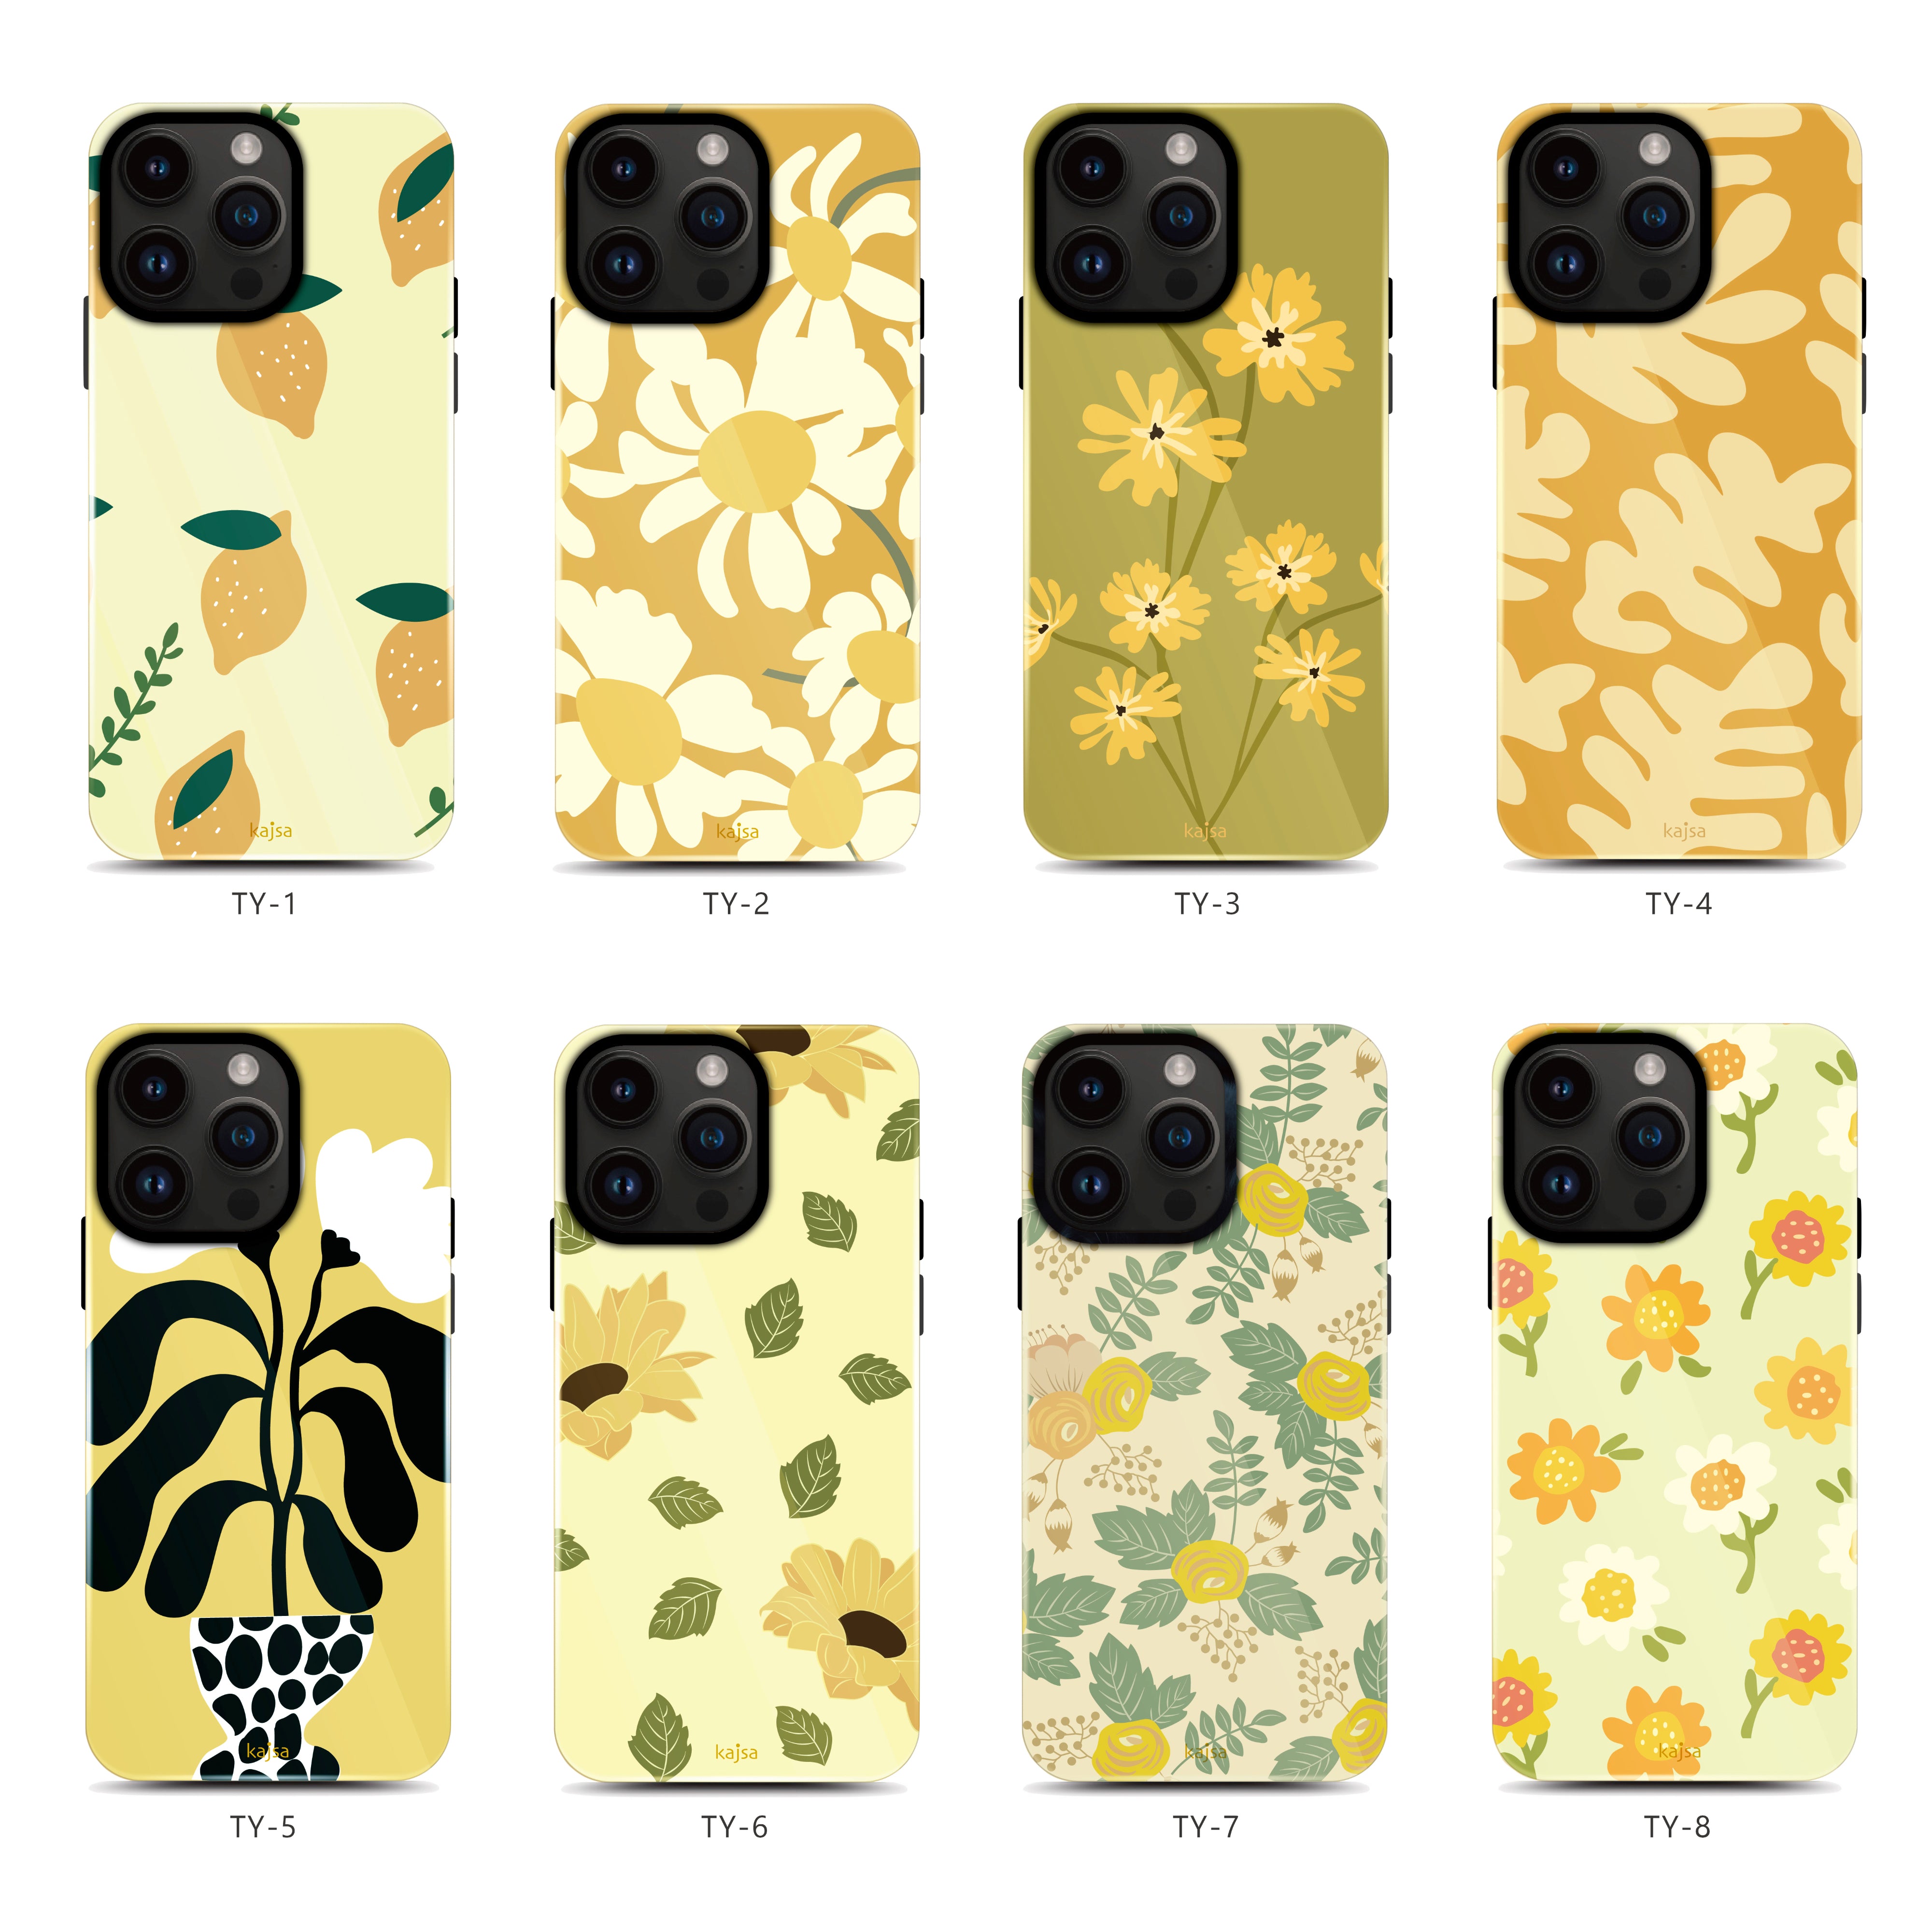 Floral Collection - Tropical Back Base for iPhone 14 (TY6)-Phone Case- phone case - phone cases- phone cover- iphone cover- iphone case- iphone cases- leather case- leather cases- DIYCASE - custom case - leather cover - hand strap case - croco pattern case - snake pattern case - carbon fiber phone case - phone case brand - unique phone case - high quality - phone case brand - protective case - buy phone case hong kong - online buy phone case - iphone‎手機殼 - 客製化手機殼 - samsung ‎手機殼 - 香港手機殼 - 買電話殼